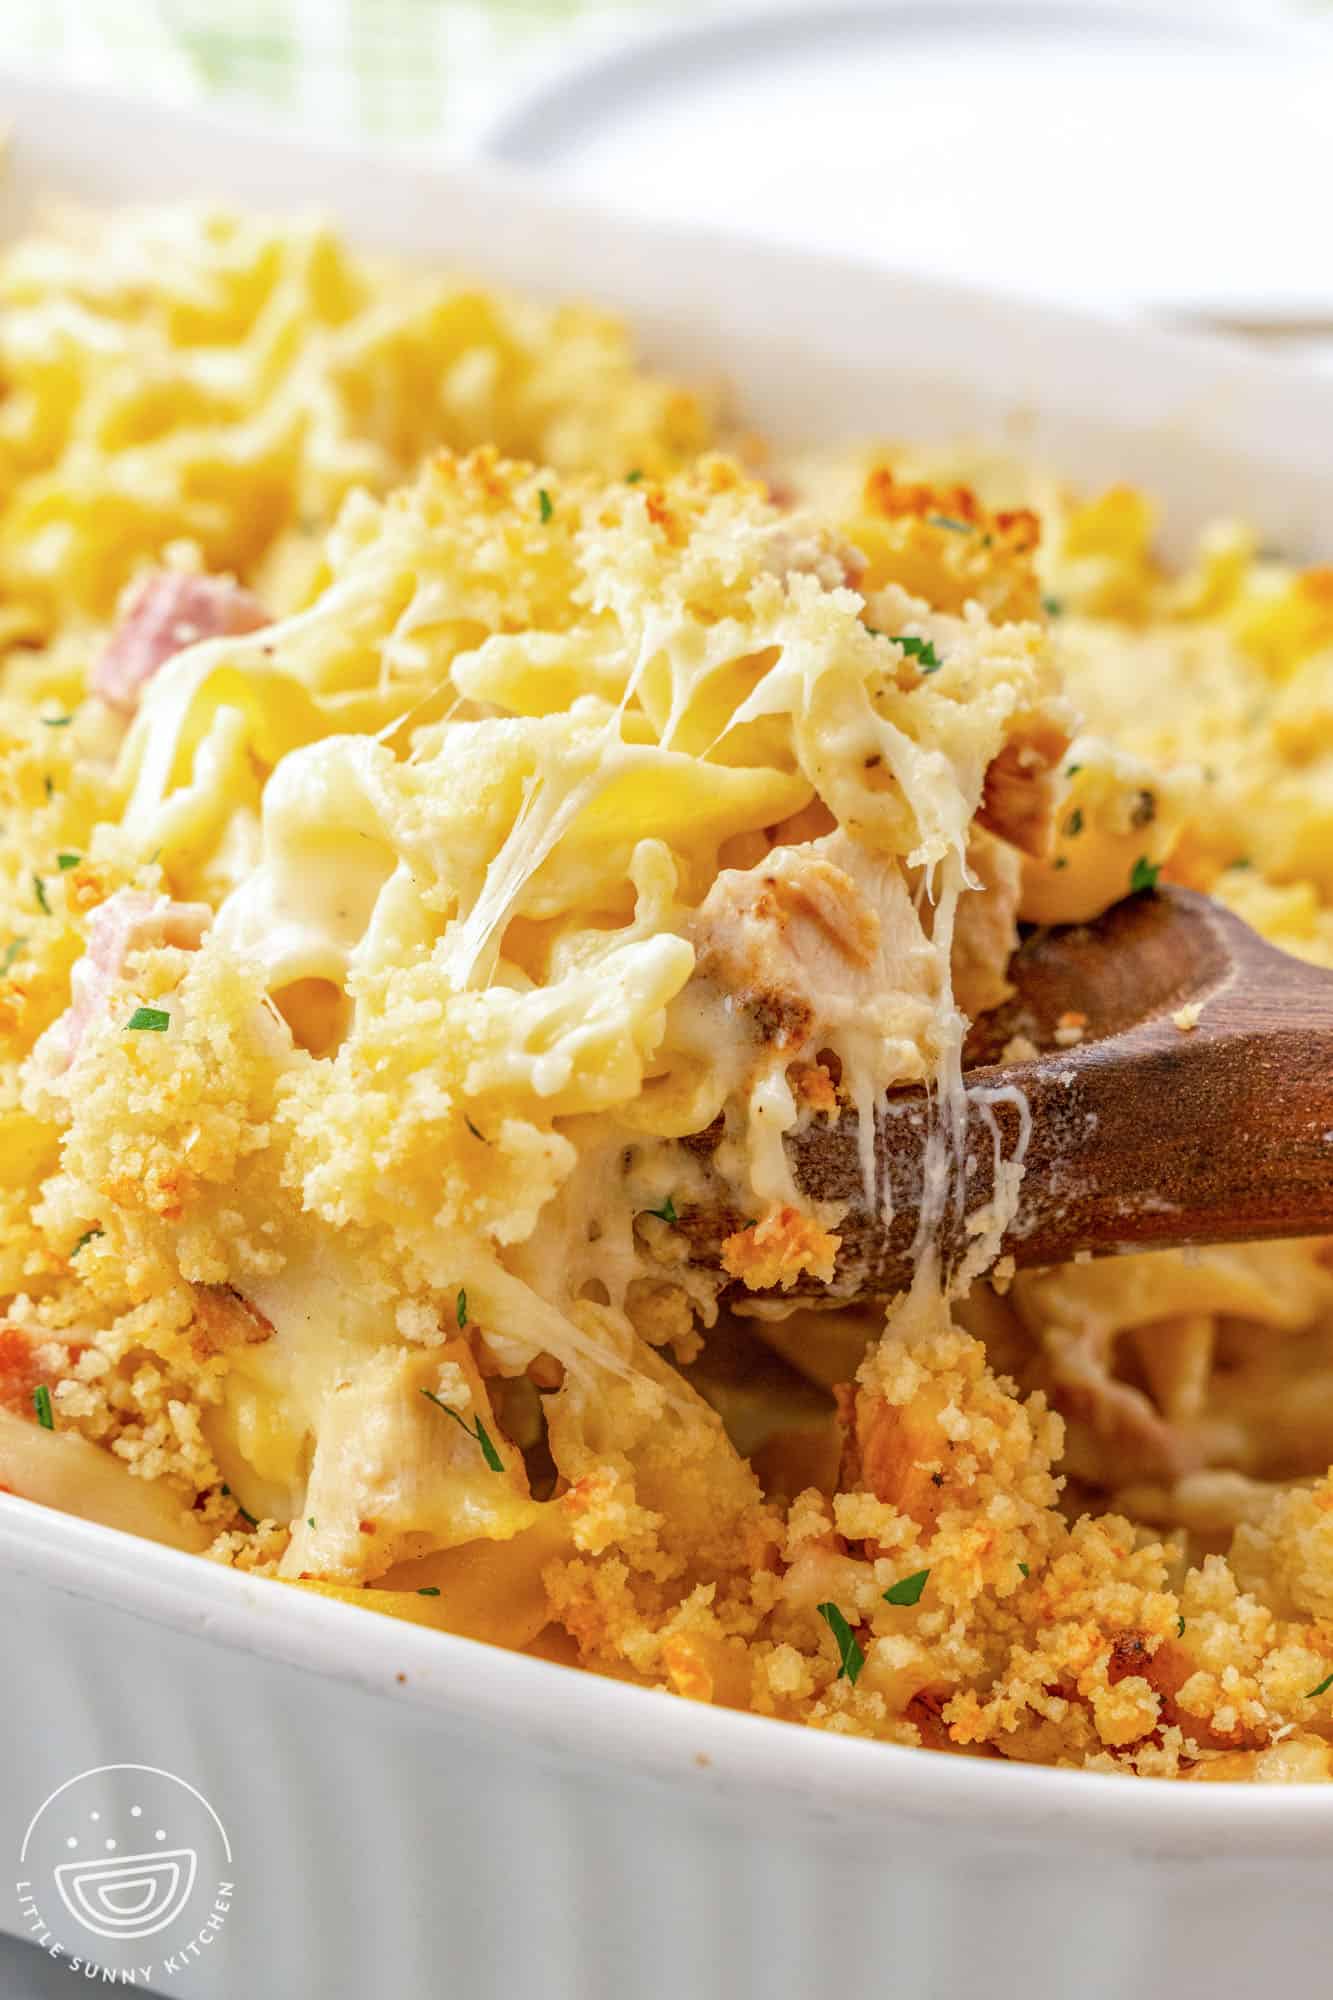 Serving Chicken Cordon Bleu Casserole from the dish with a wooden serving spoon, showing the cheesy creamy textures